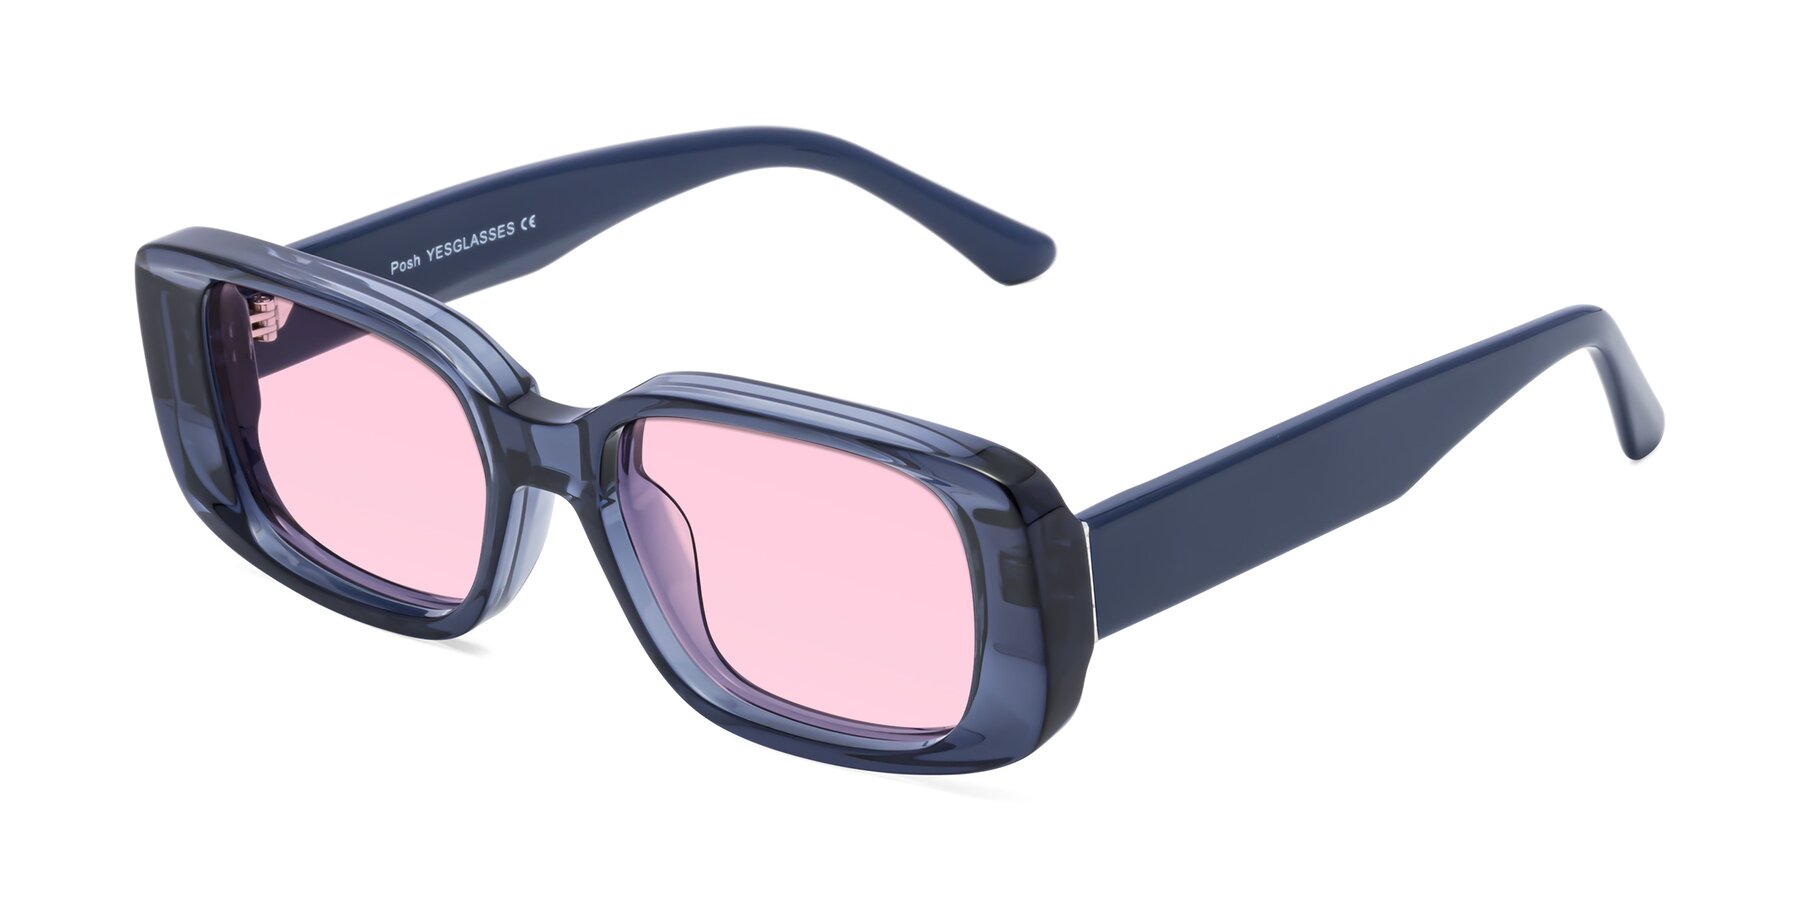 Angle of Posh in Translucent Blue with Light Pink Tinted Lenses